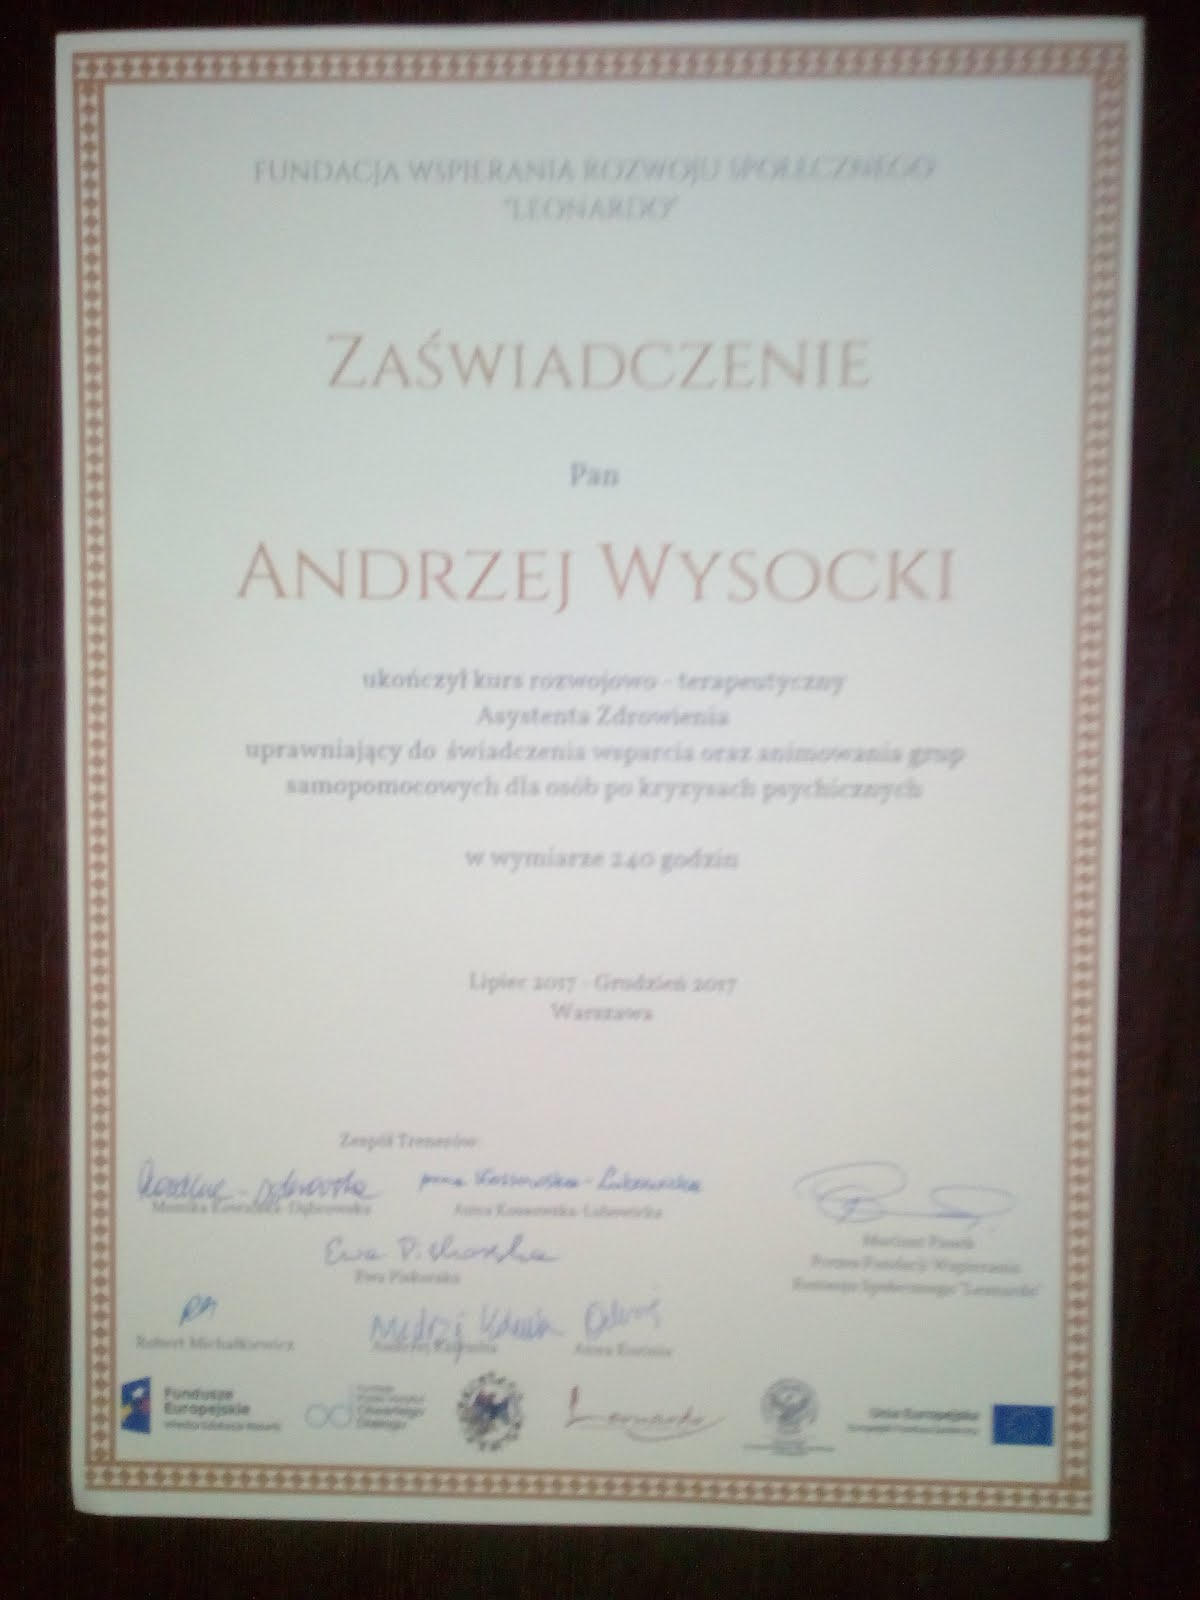 A course completion Diploma.